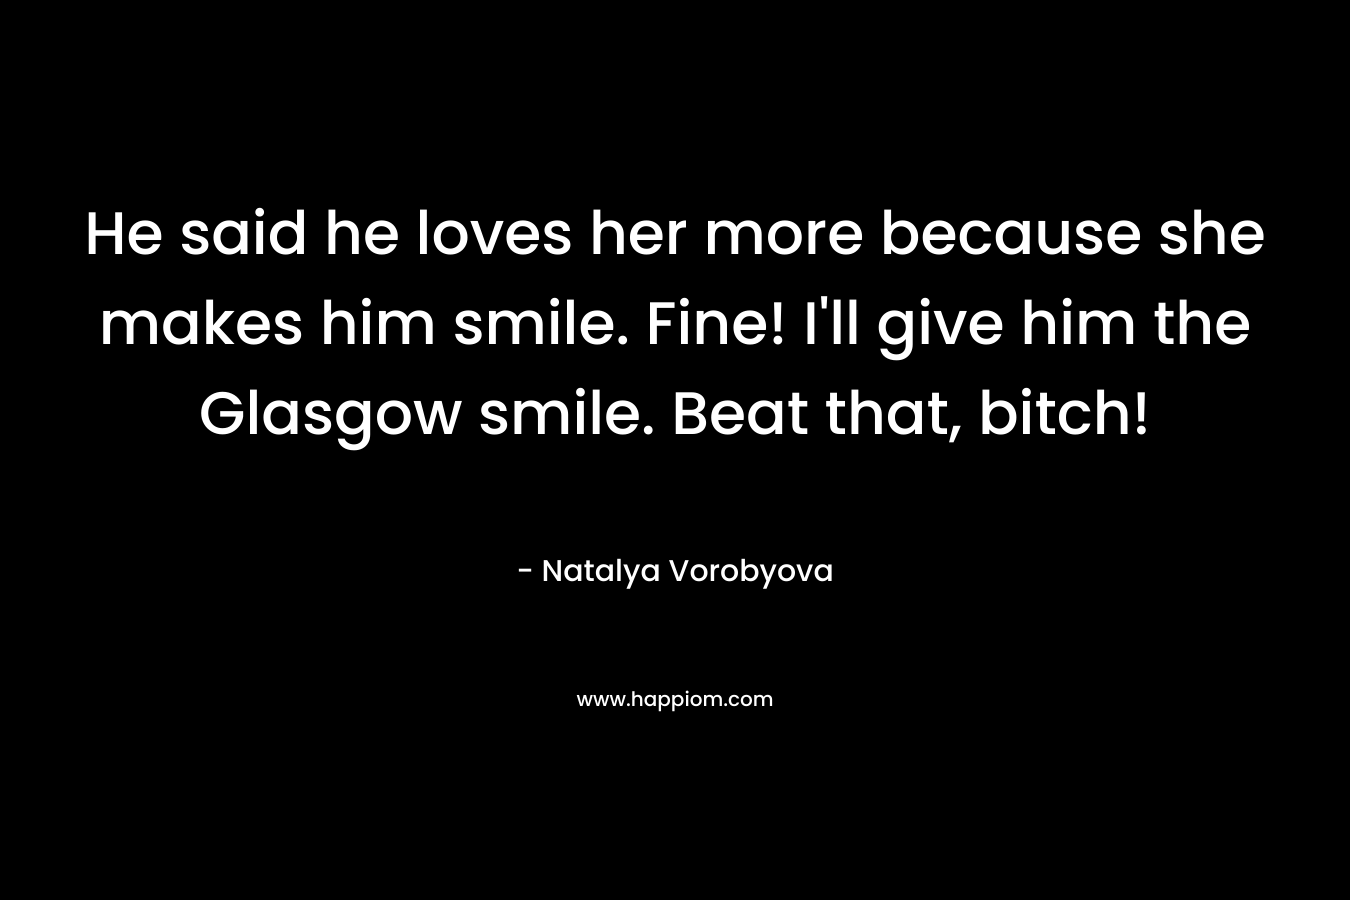 He said he loves her more because she makes him smile. Fine! I'll give him the Glasgow smile. Beat that, bitch!